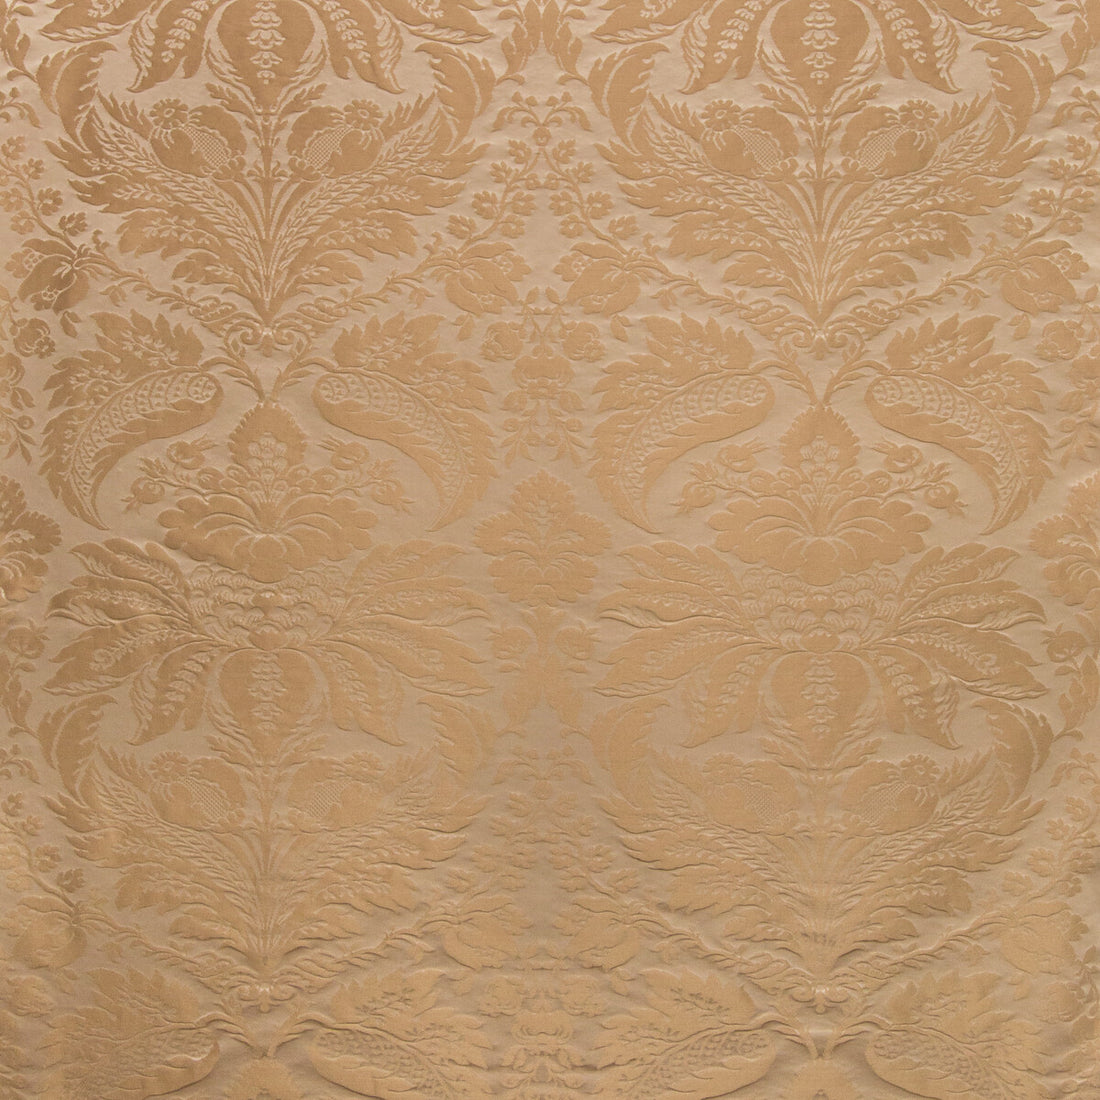 Damask Pierre fabric in chestnut color - pattern 8013188.606.0 - by Brunschwig &amp; Fils in the B&amp;F Showroom Exclusive 2019 collection